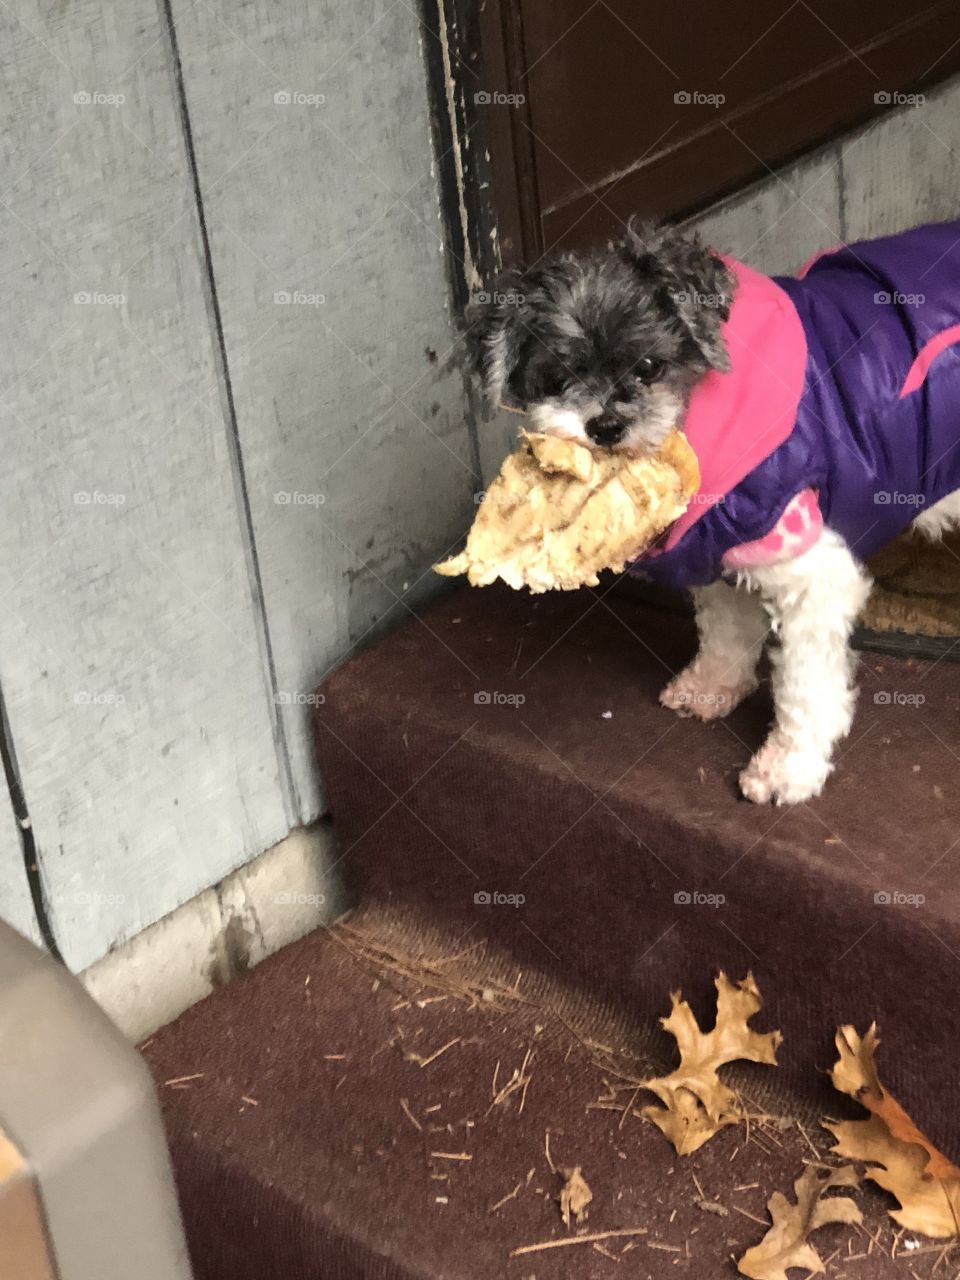 My dog Cloe with a prized piece of chicken in her mouth. I was taking my three dogs outside when I noticed she has something in her mouth. It looked like a leaf but on further inspection I realized it was piece of chicken from the garbage. 